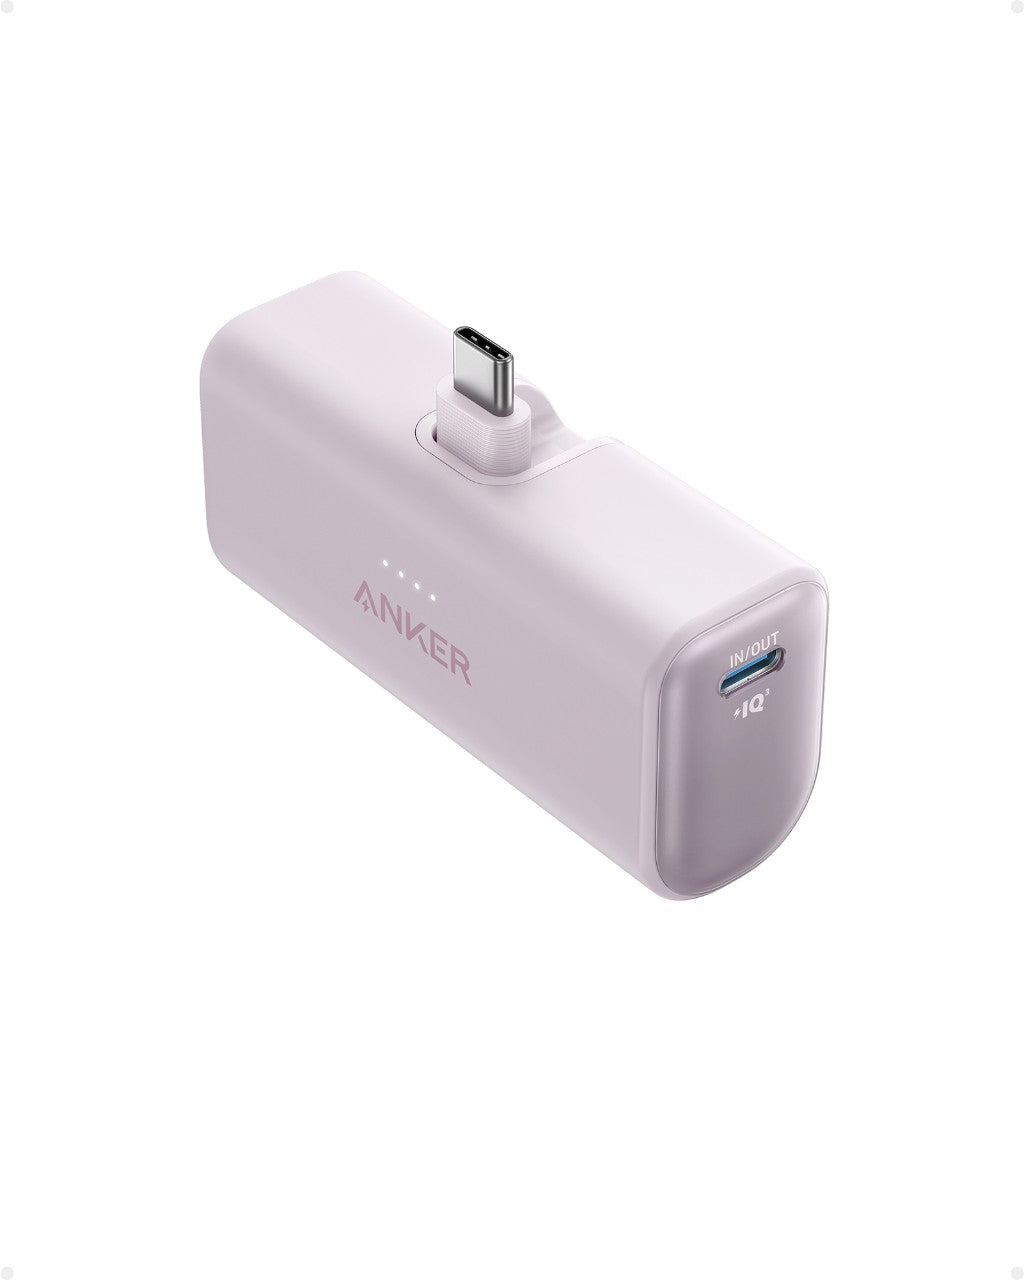  Anker Nano Portable Charger for iPhone, with Built-in